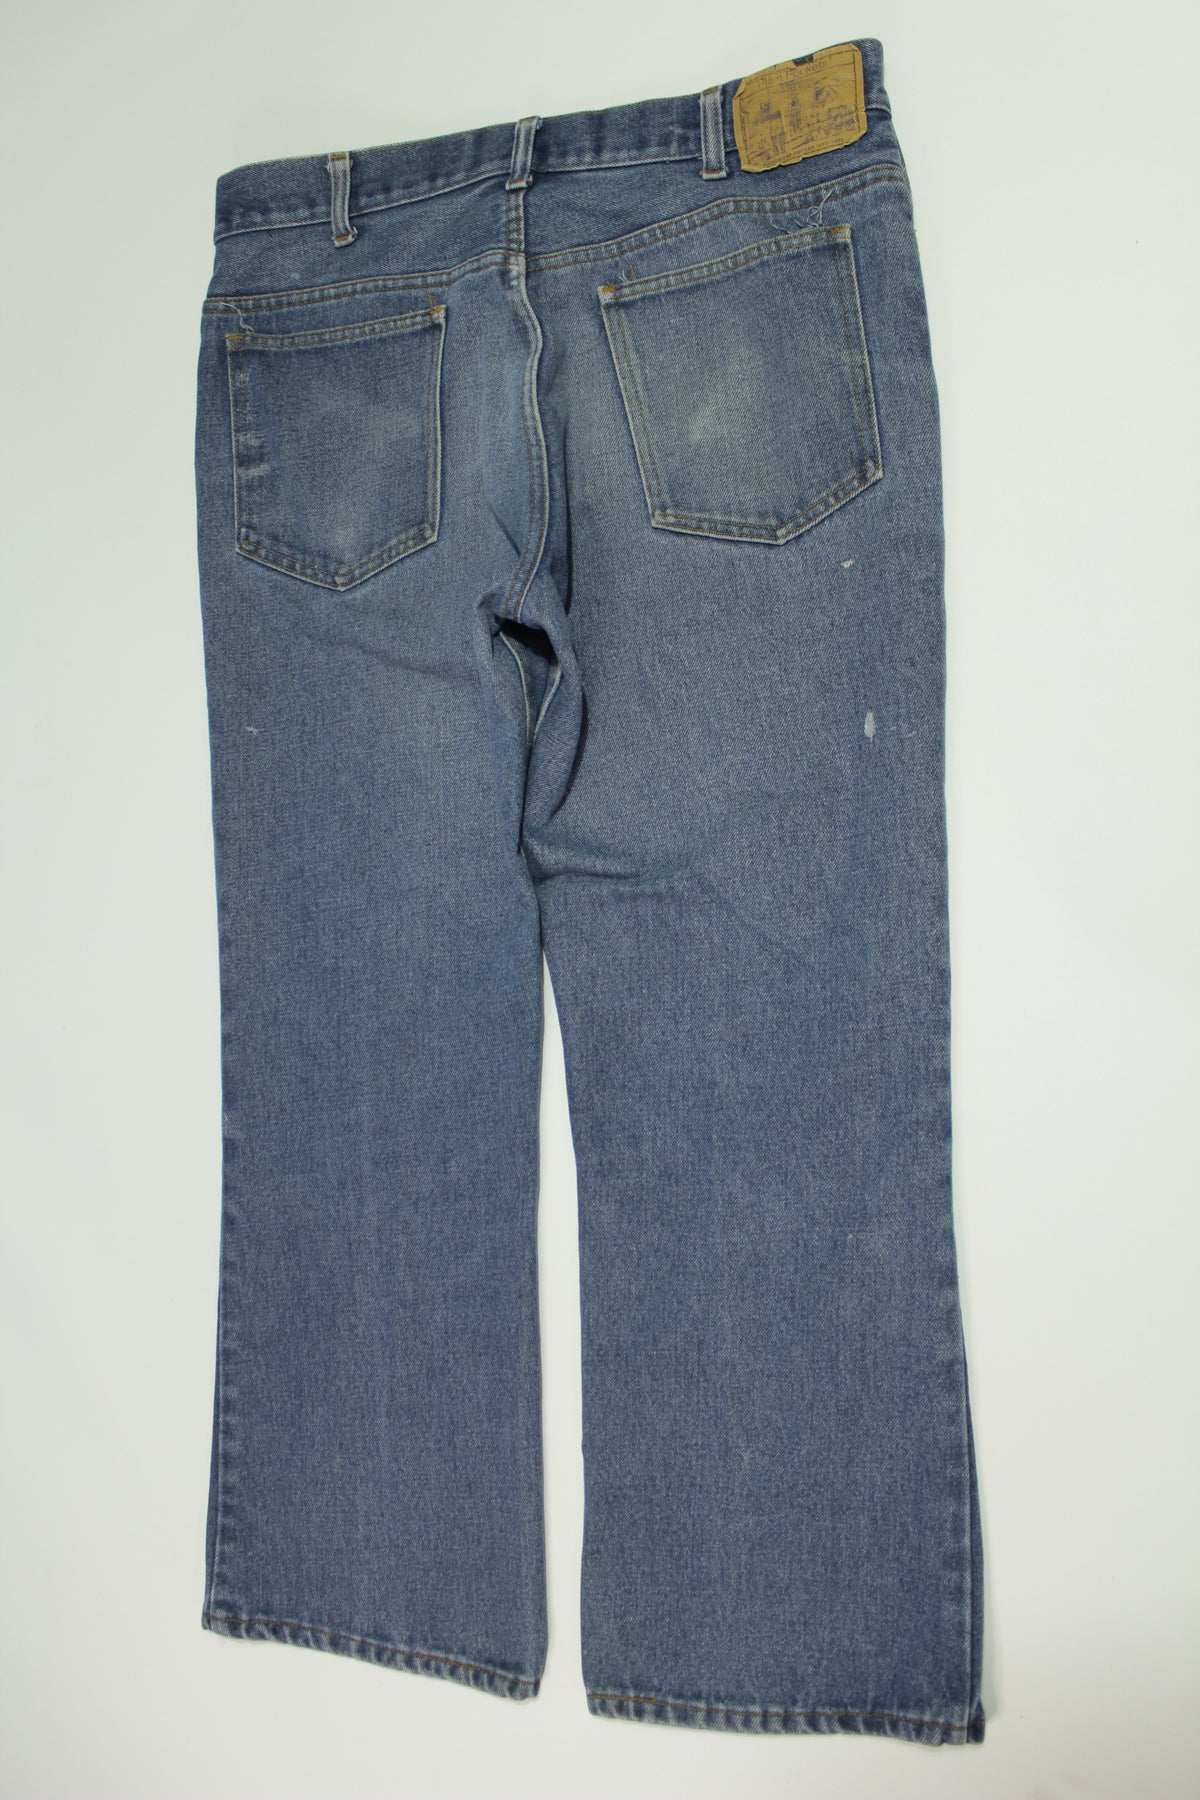 JC Penneys Plain Pockets Vintage 80's Distressed Washed Made In USA Jeans